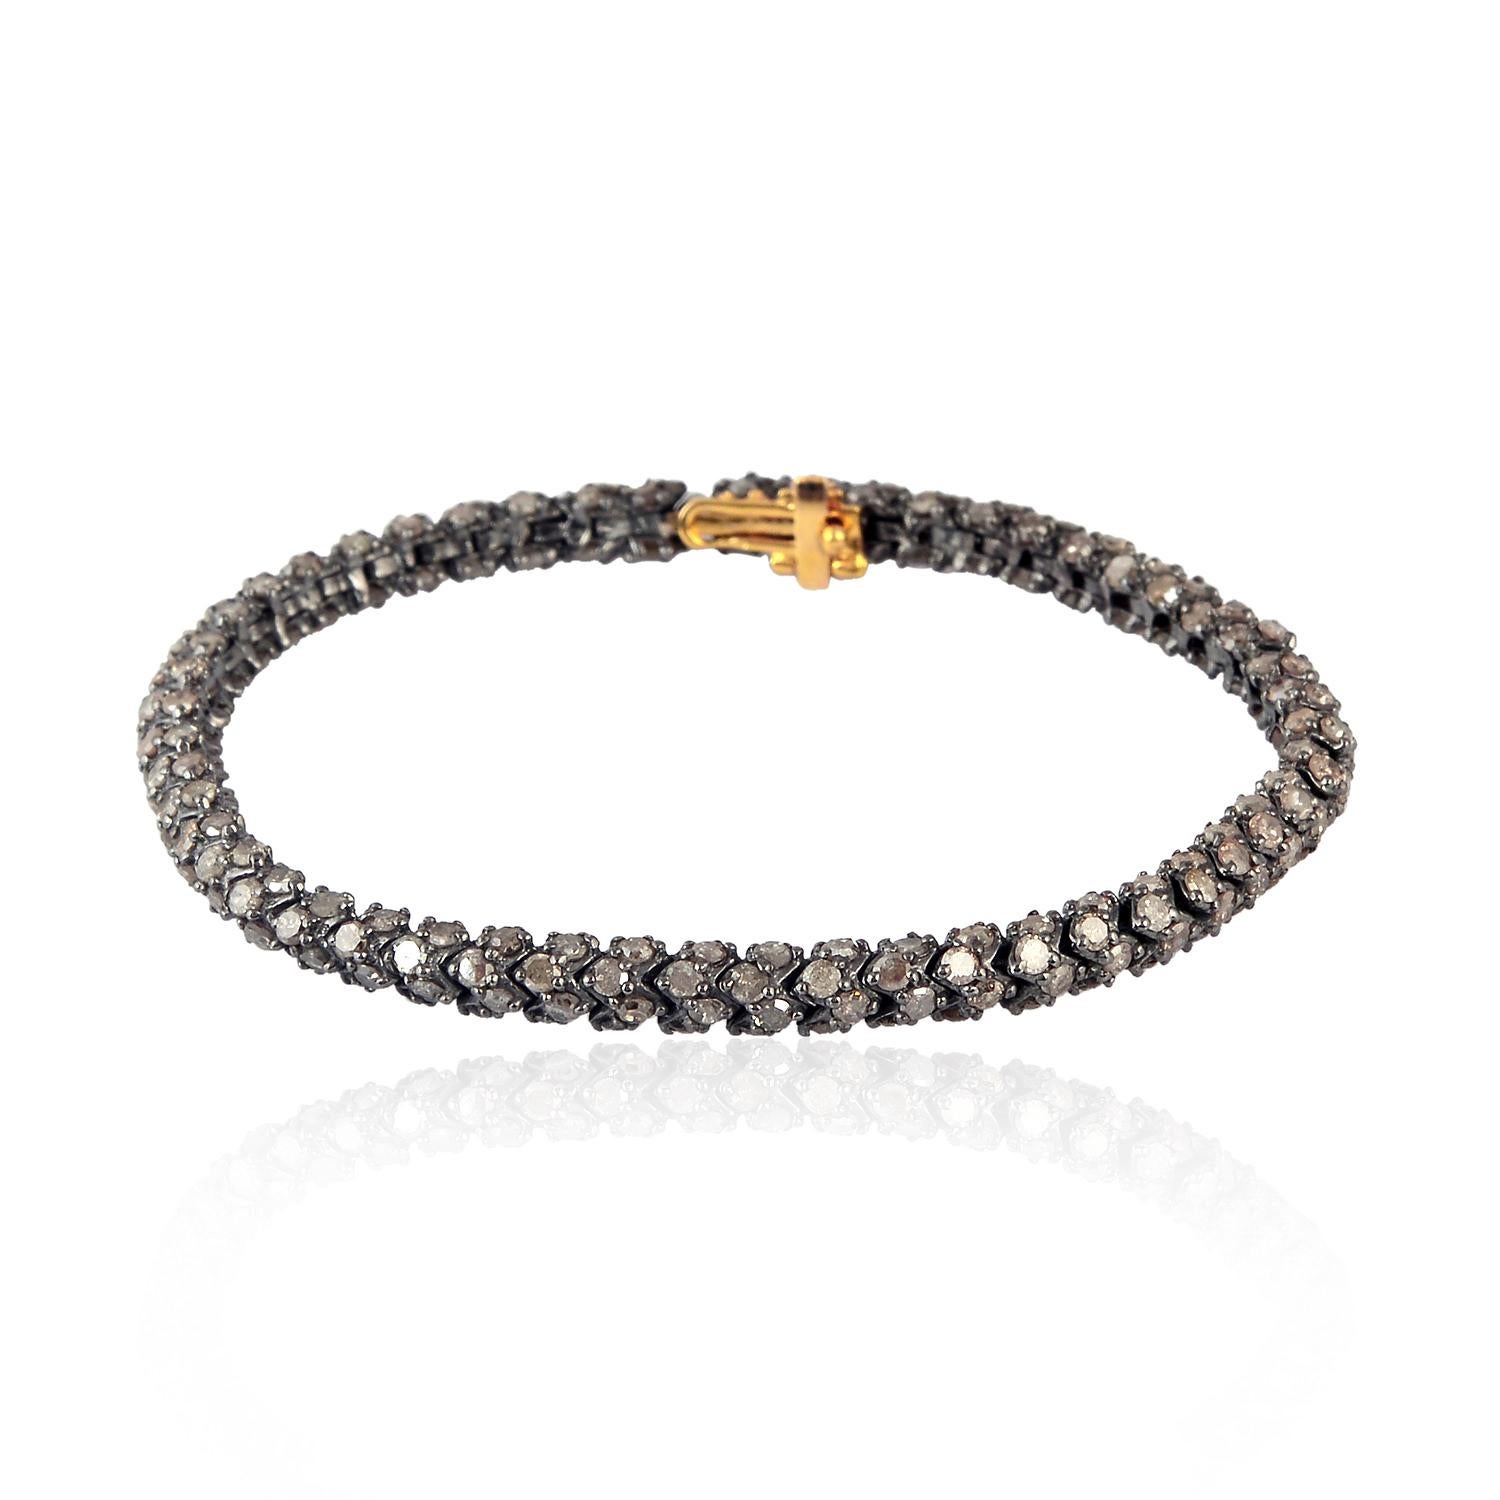 Mixed Cut 7.74 ct Diamond Bracelet Made In 14k Gold & Silver   For Sale